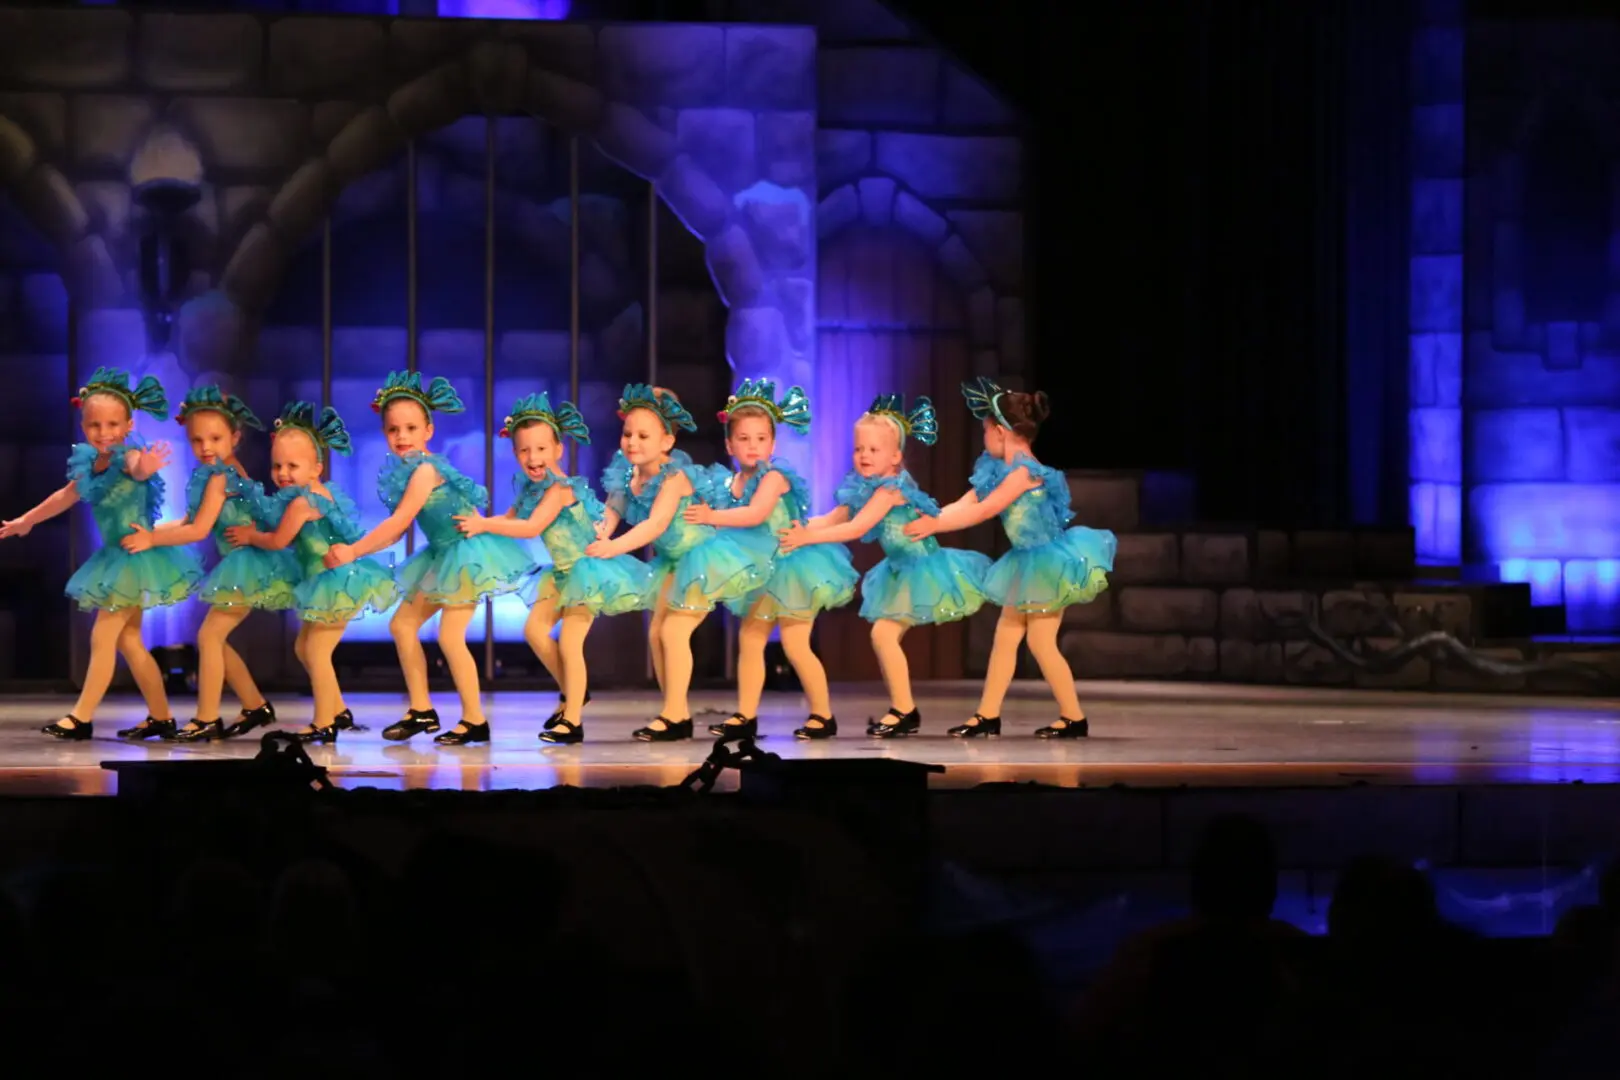 A Group of Girls in Blue and Yellow Costume Dancing on Stage